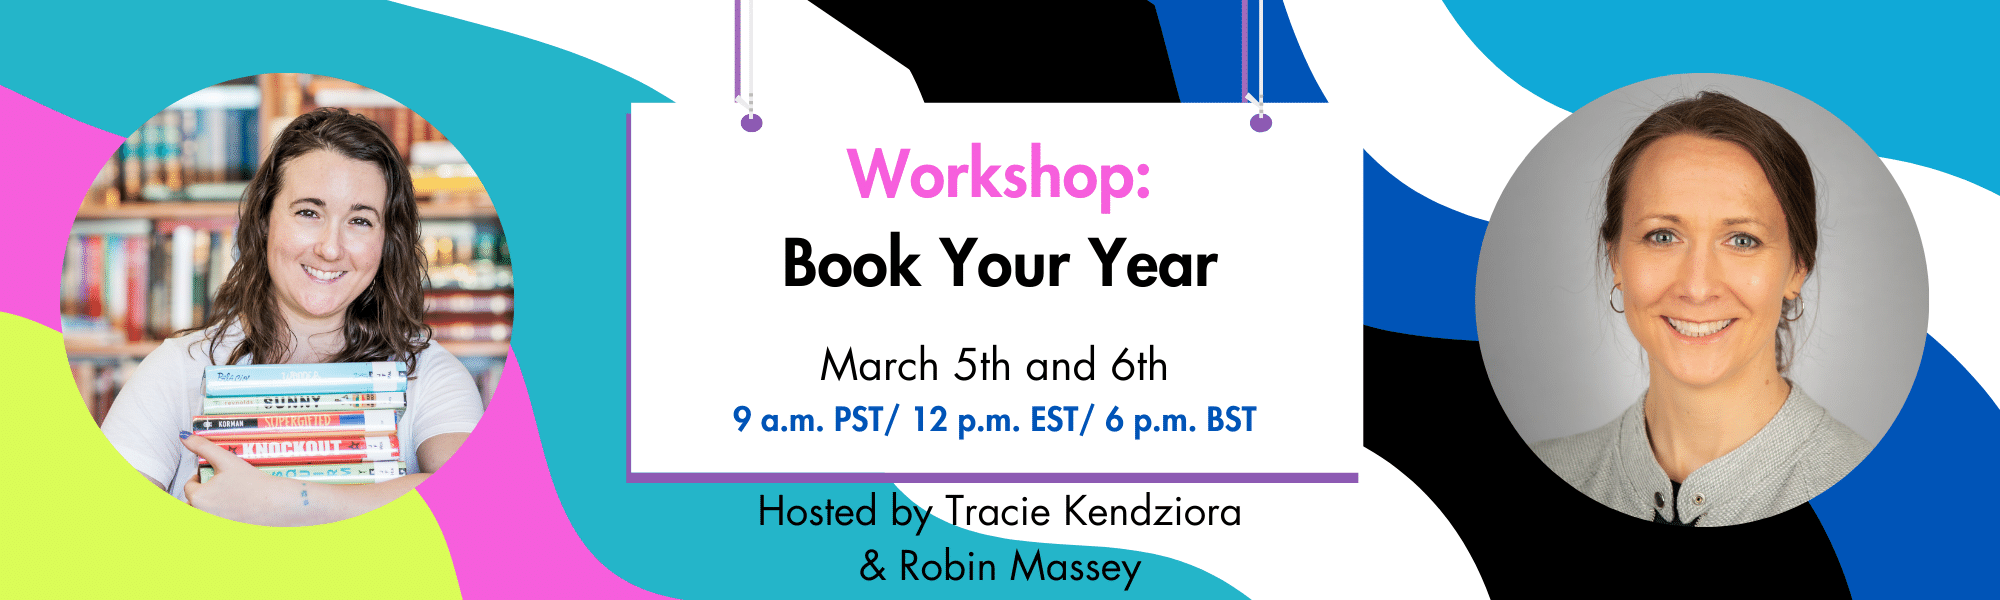 Book Your Year workshop banner with multiple colors and photos of 2 women